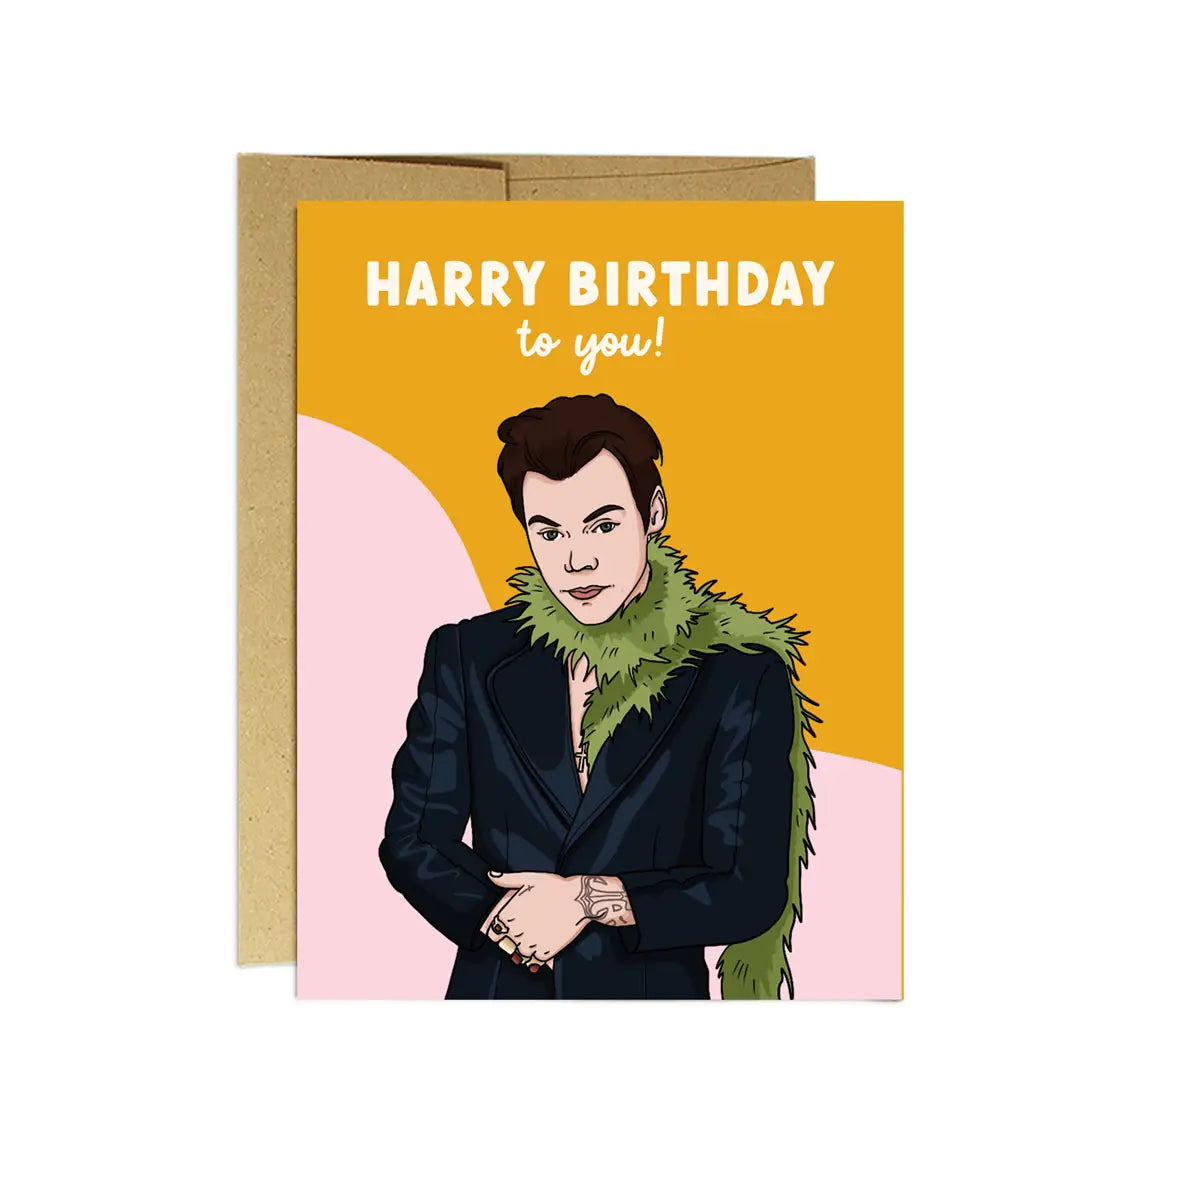 Harry Birthday To You Card